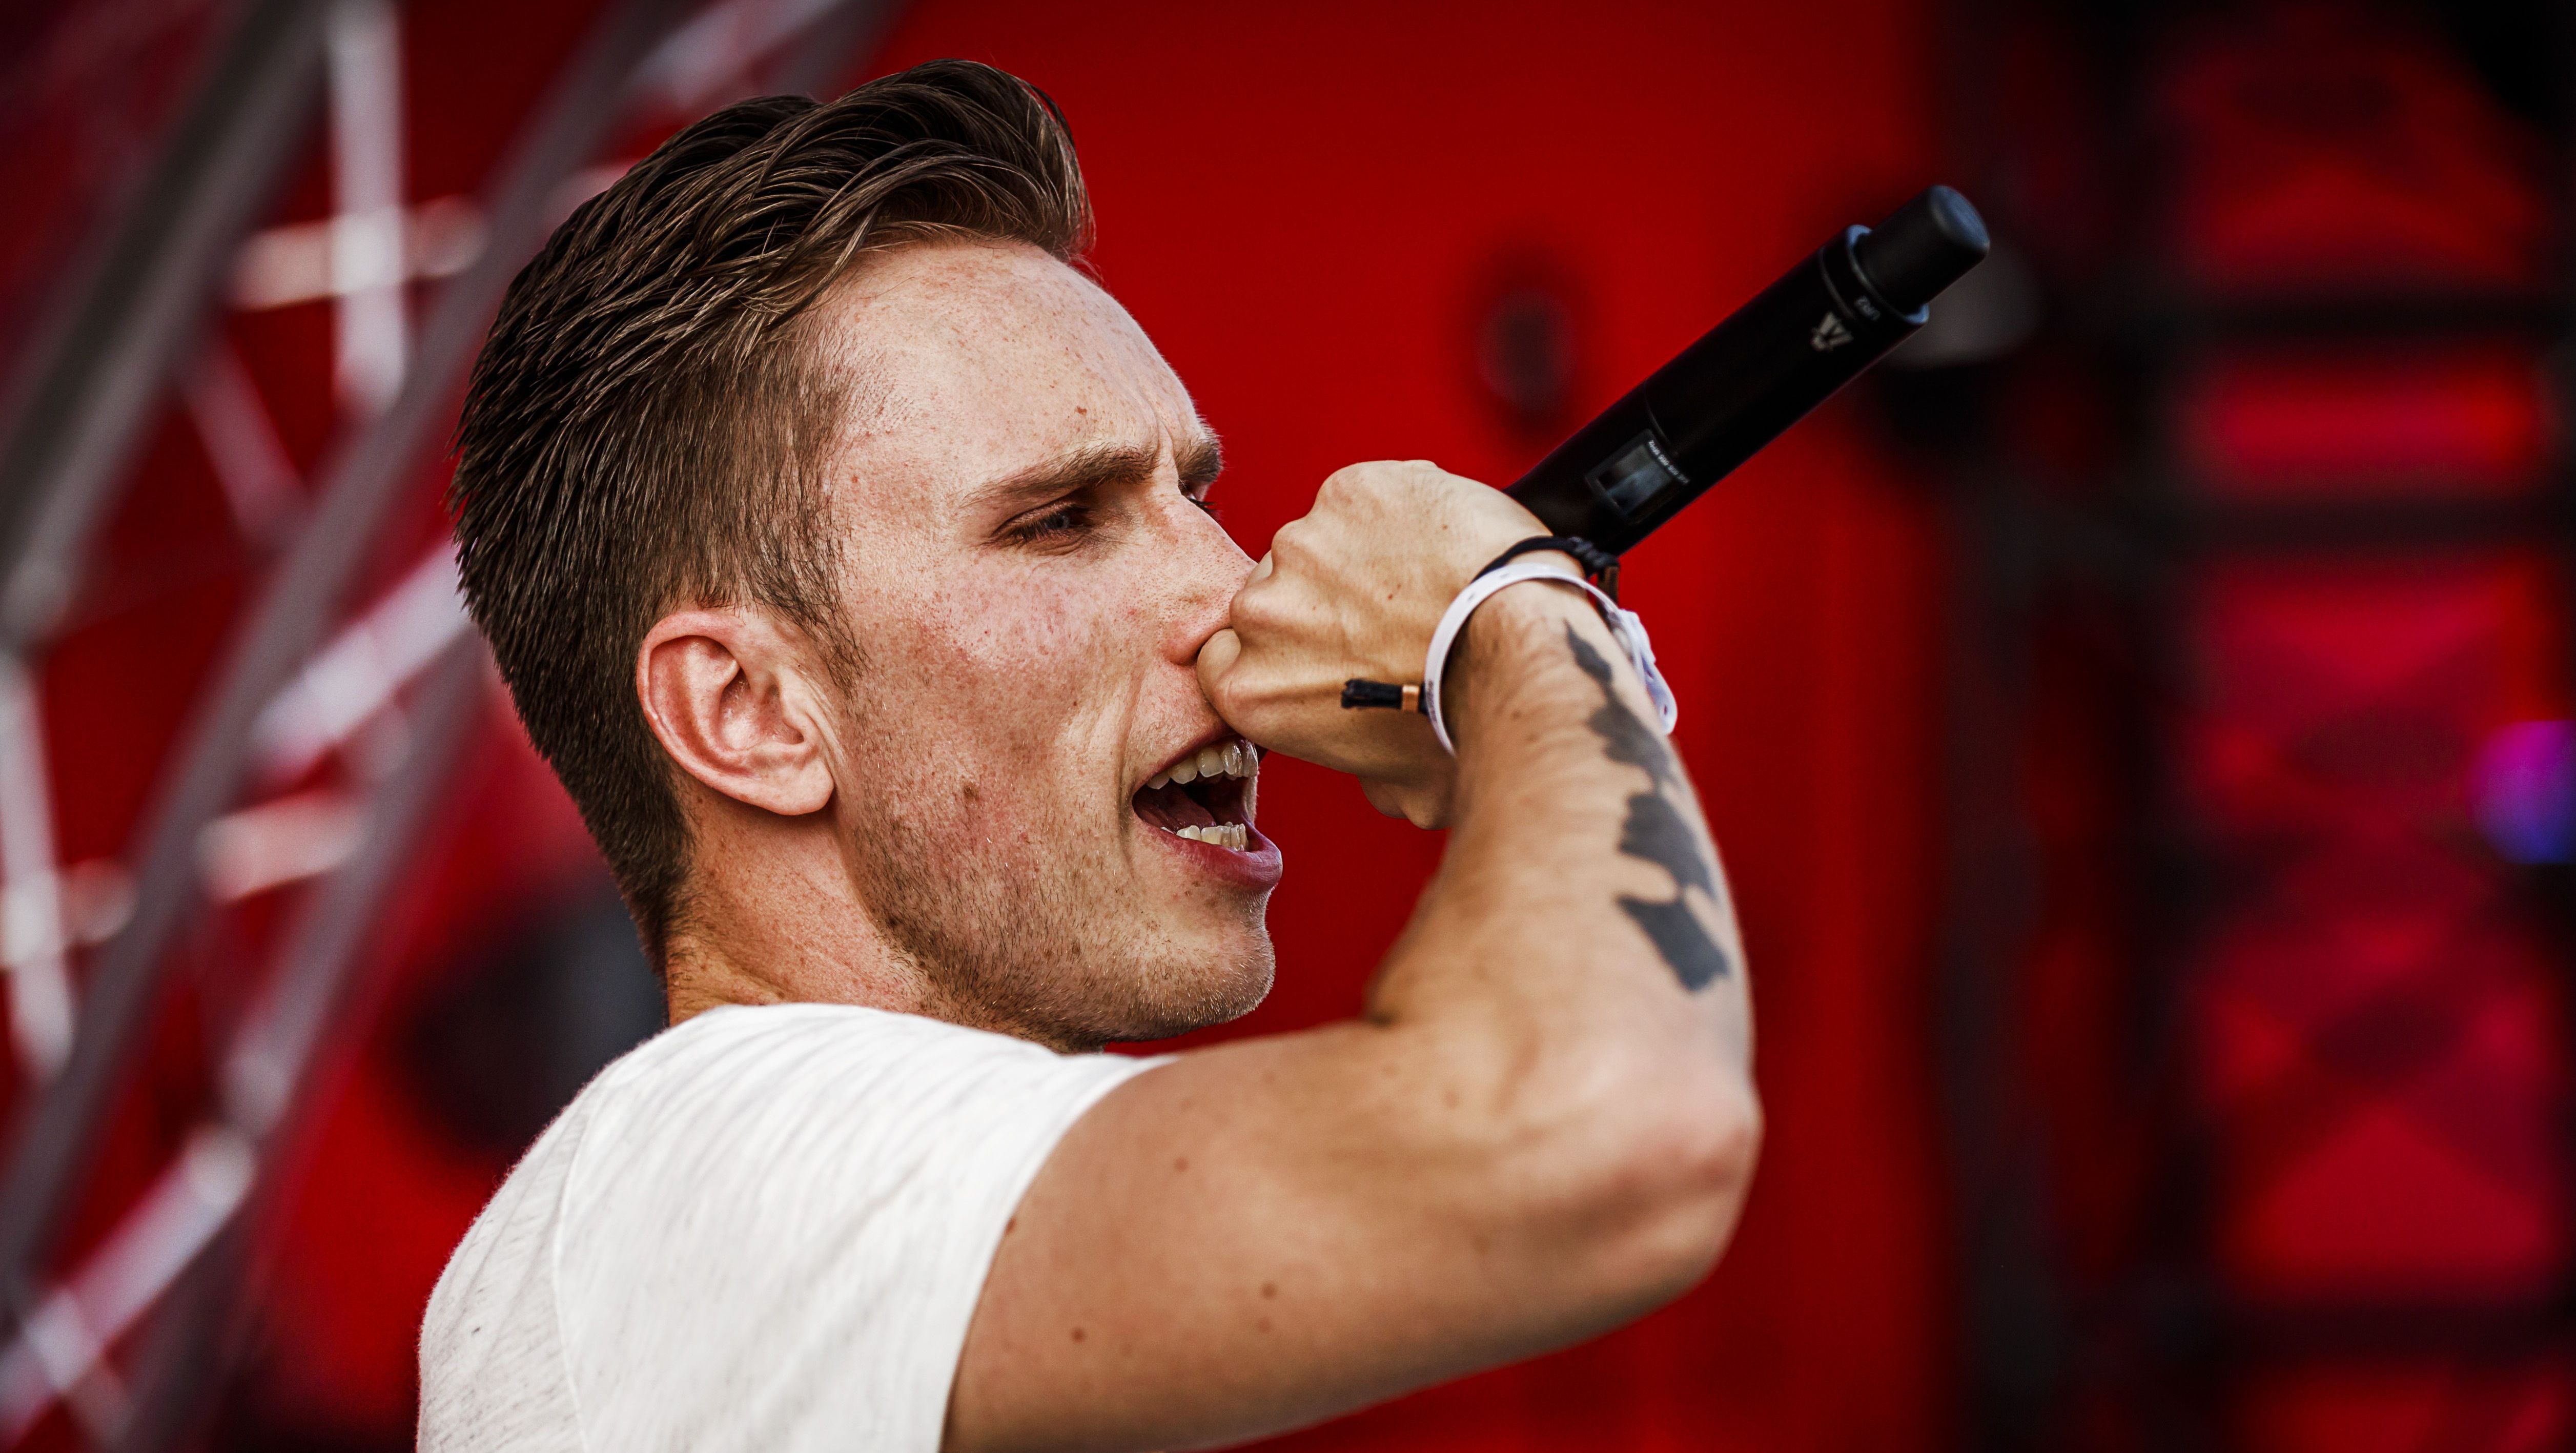 Nicky Romero Wallpaper Image Photos Pictures Background